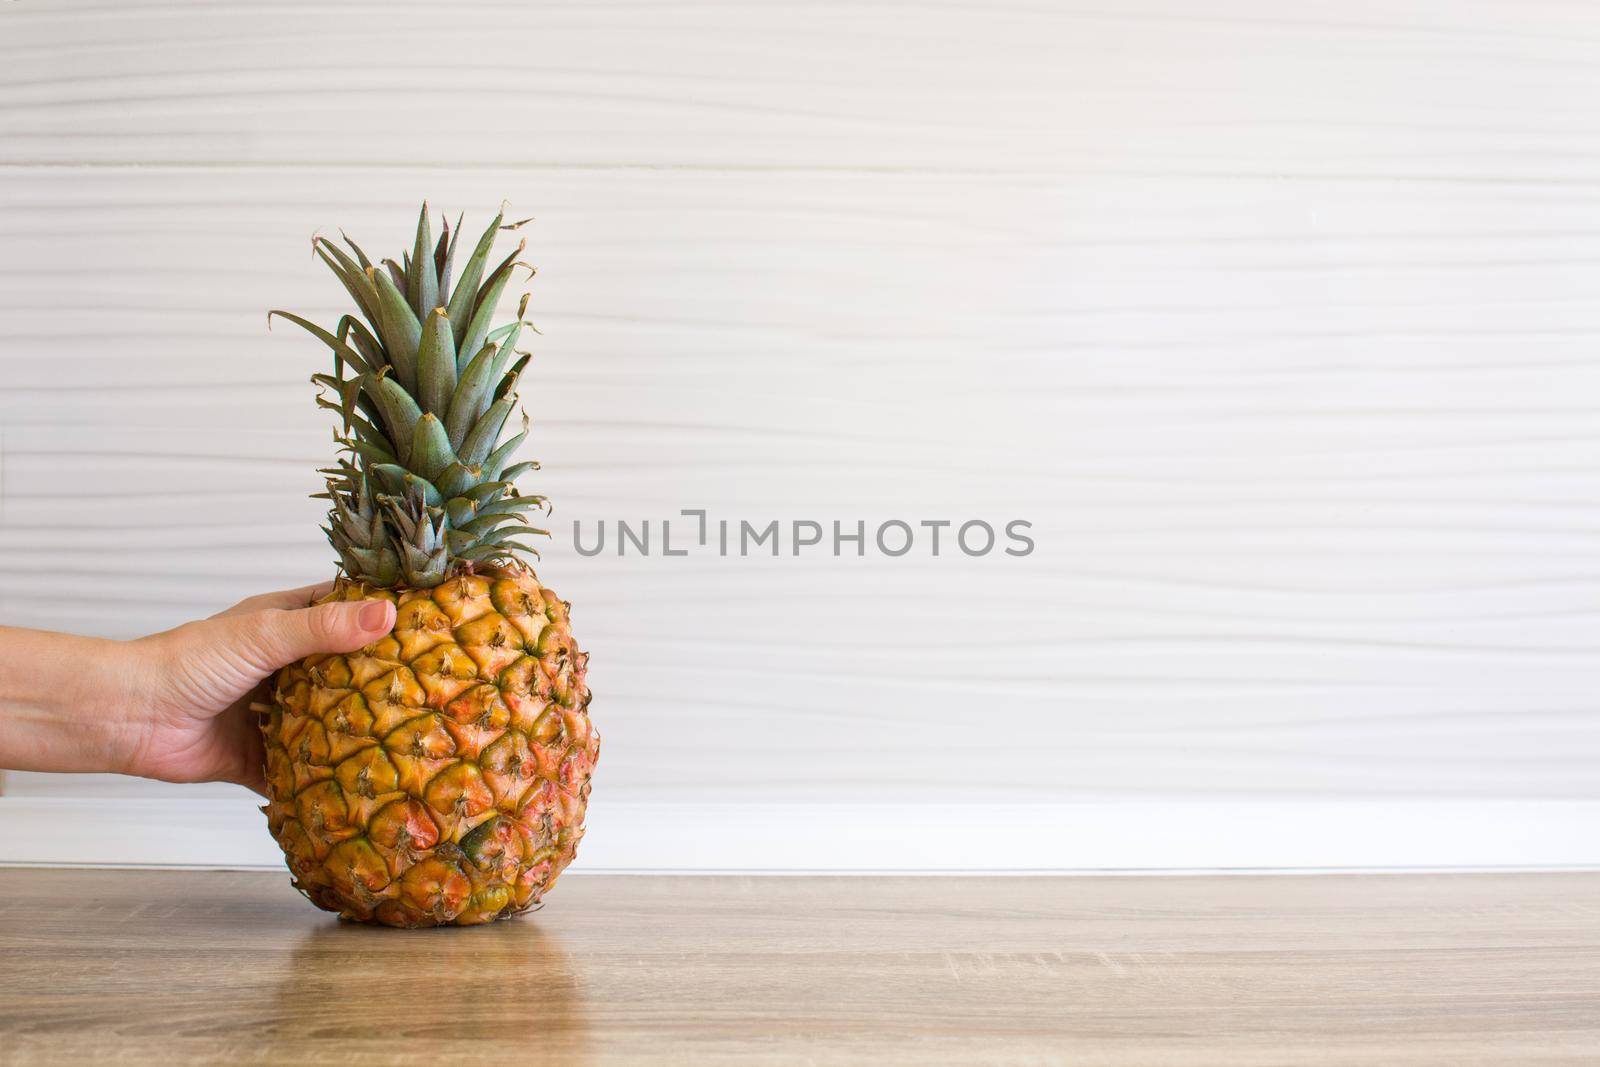 Female hand picking up a pineapple by chandlervid85